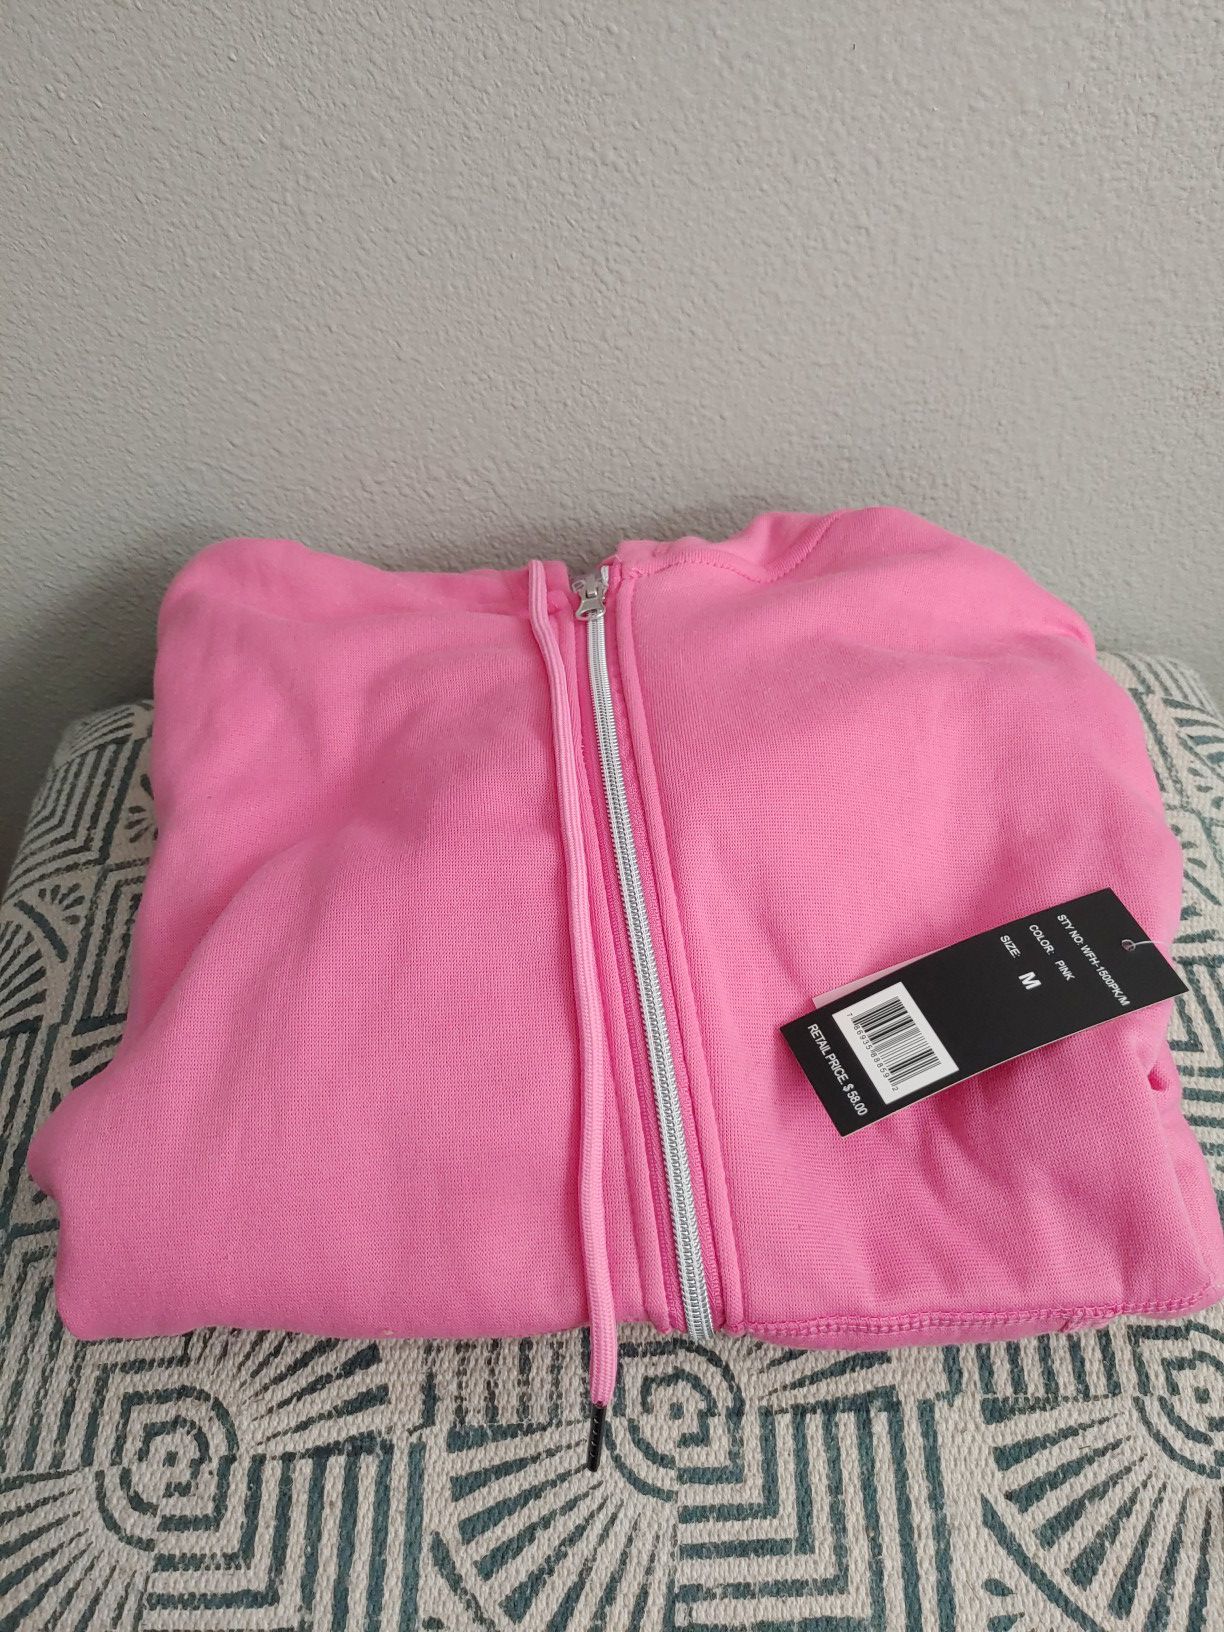 Galaxy By Harvic Pink Zip-up Hoodie New With Tags medium retail $58.00